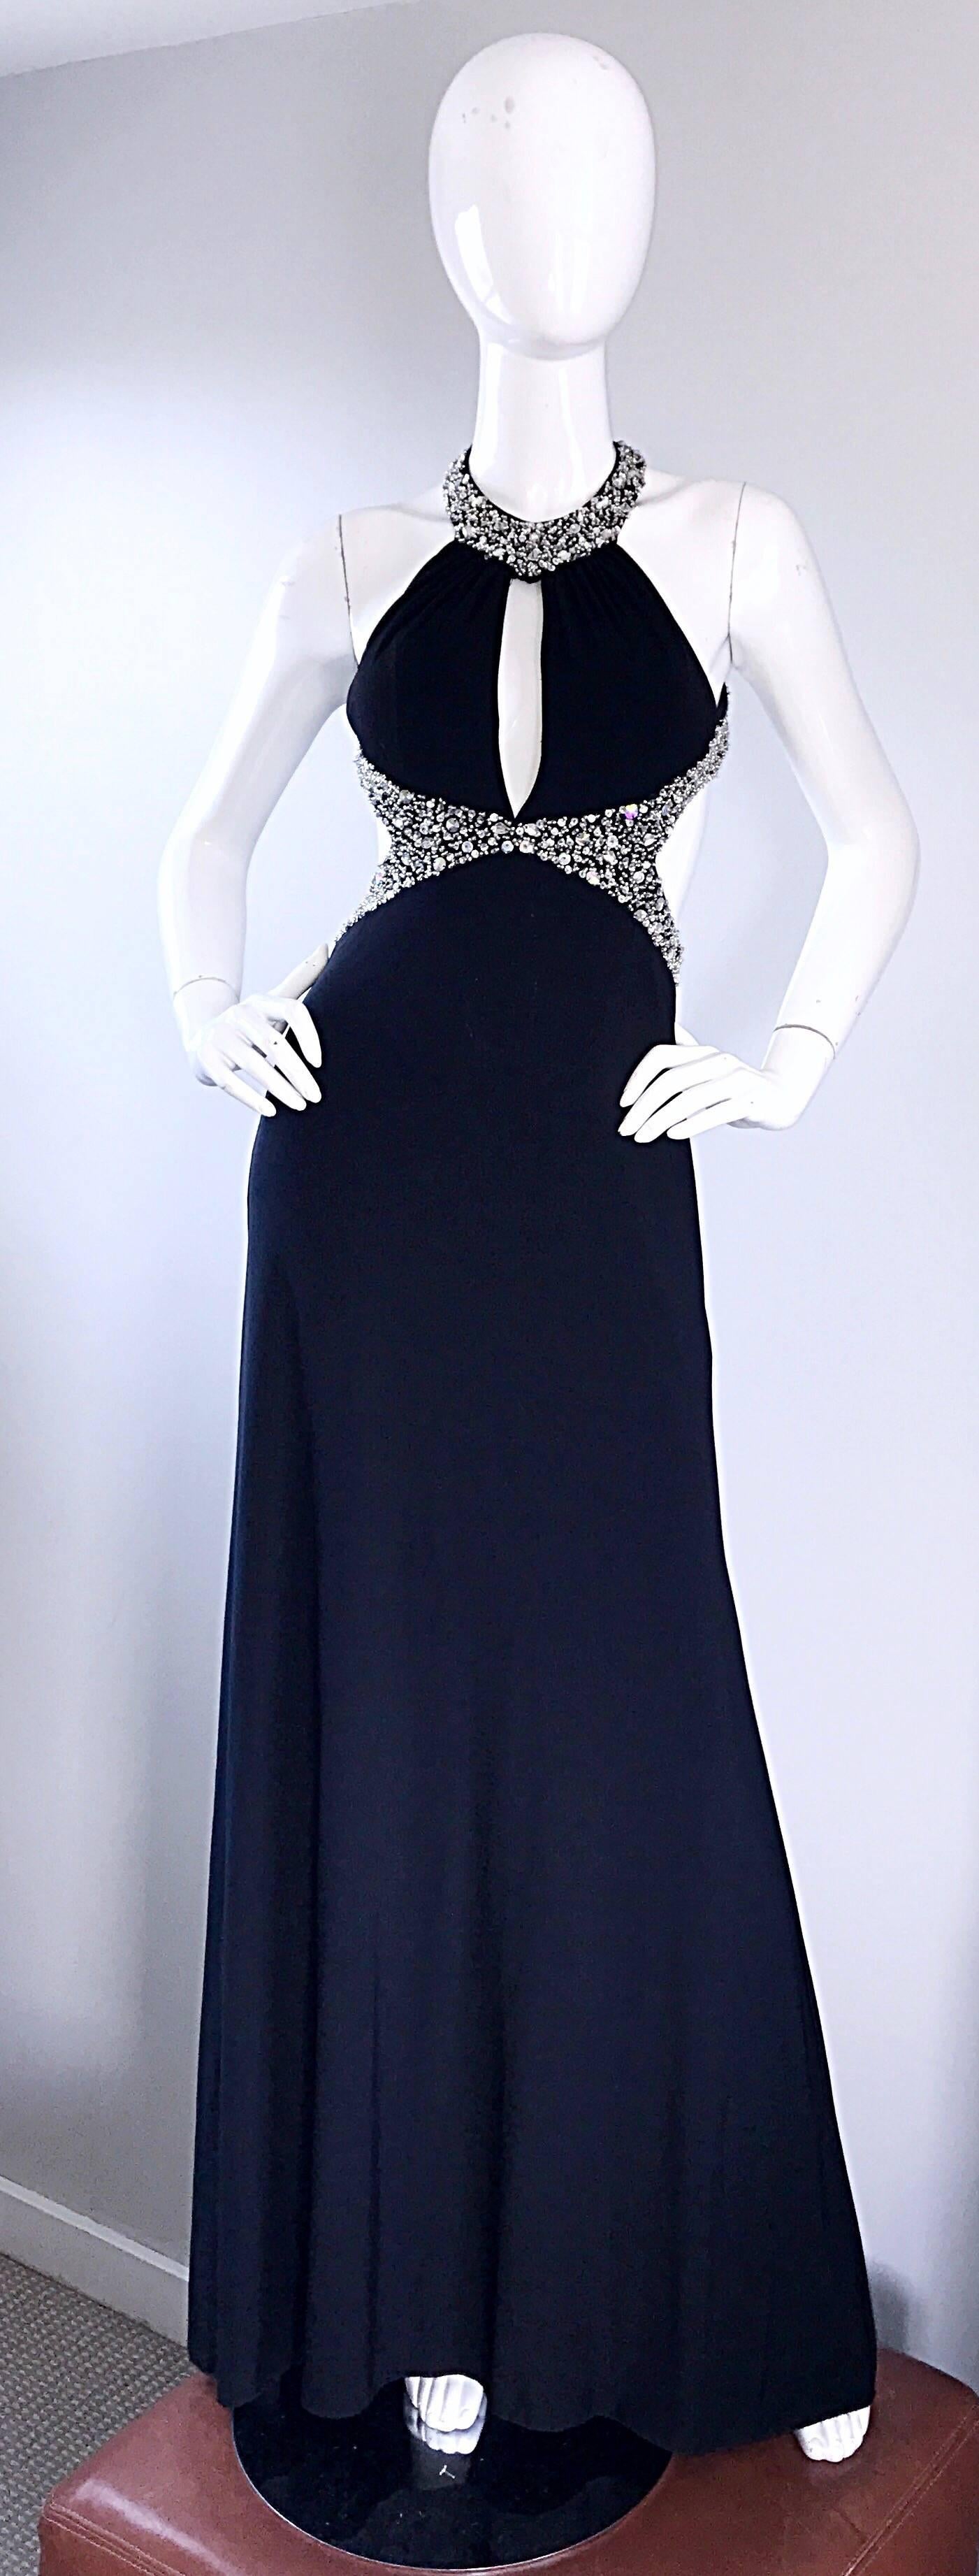 Sexy 90s custom made black jersey cut-out gown! Crystal rhinestone beaded halter neckline, with a matching beaded and sequined waistband. Cut-outs at the side, with a plunging neckline. Multiple layers of jersey fabric hug the body in all the right